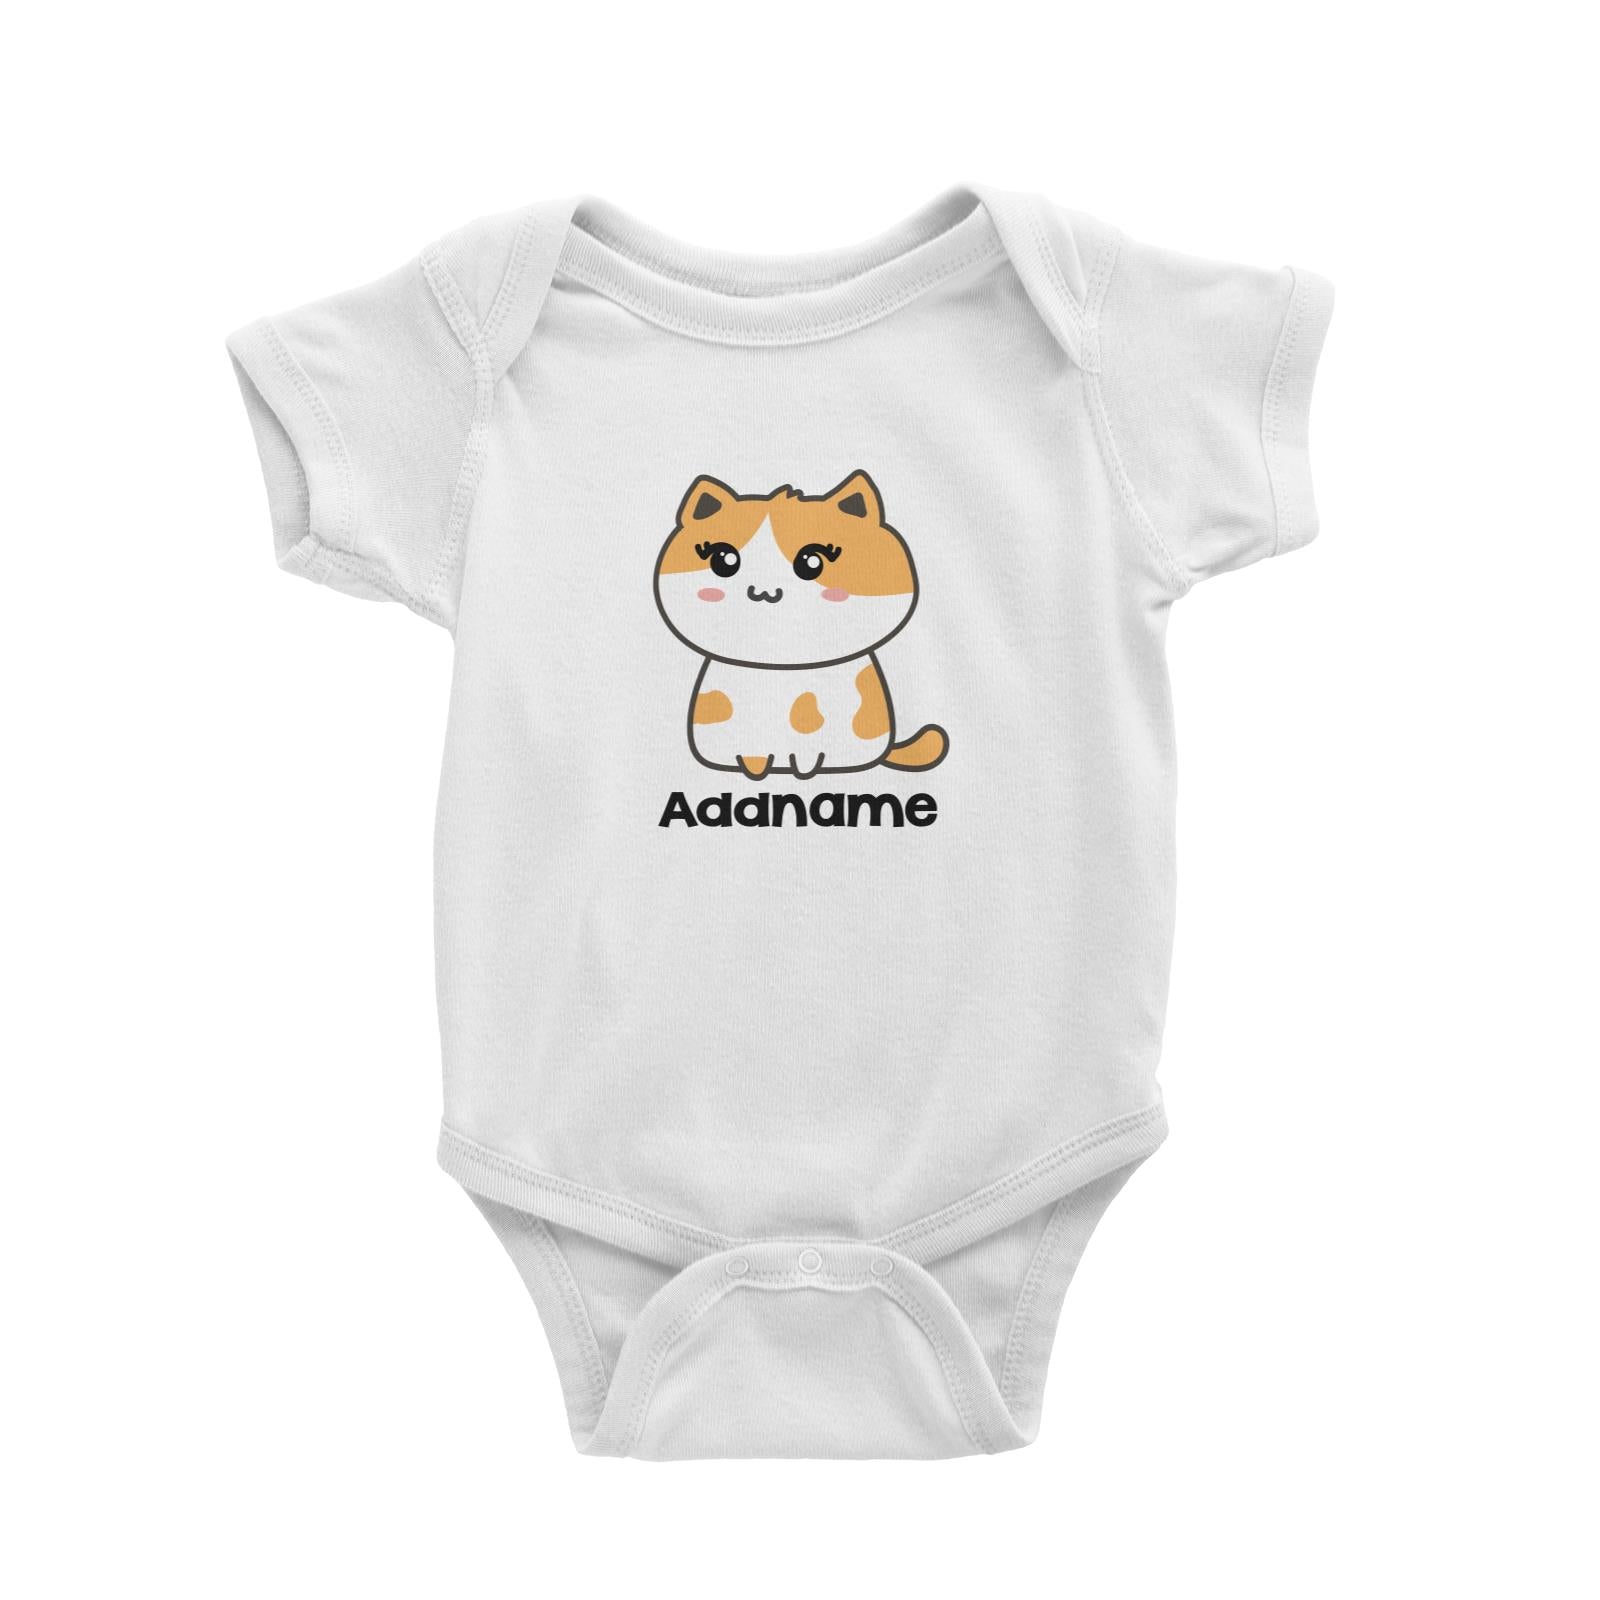 Drawn Adorable Cats White & Yellow Addname Baby Romper